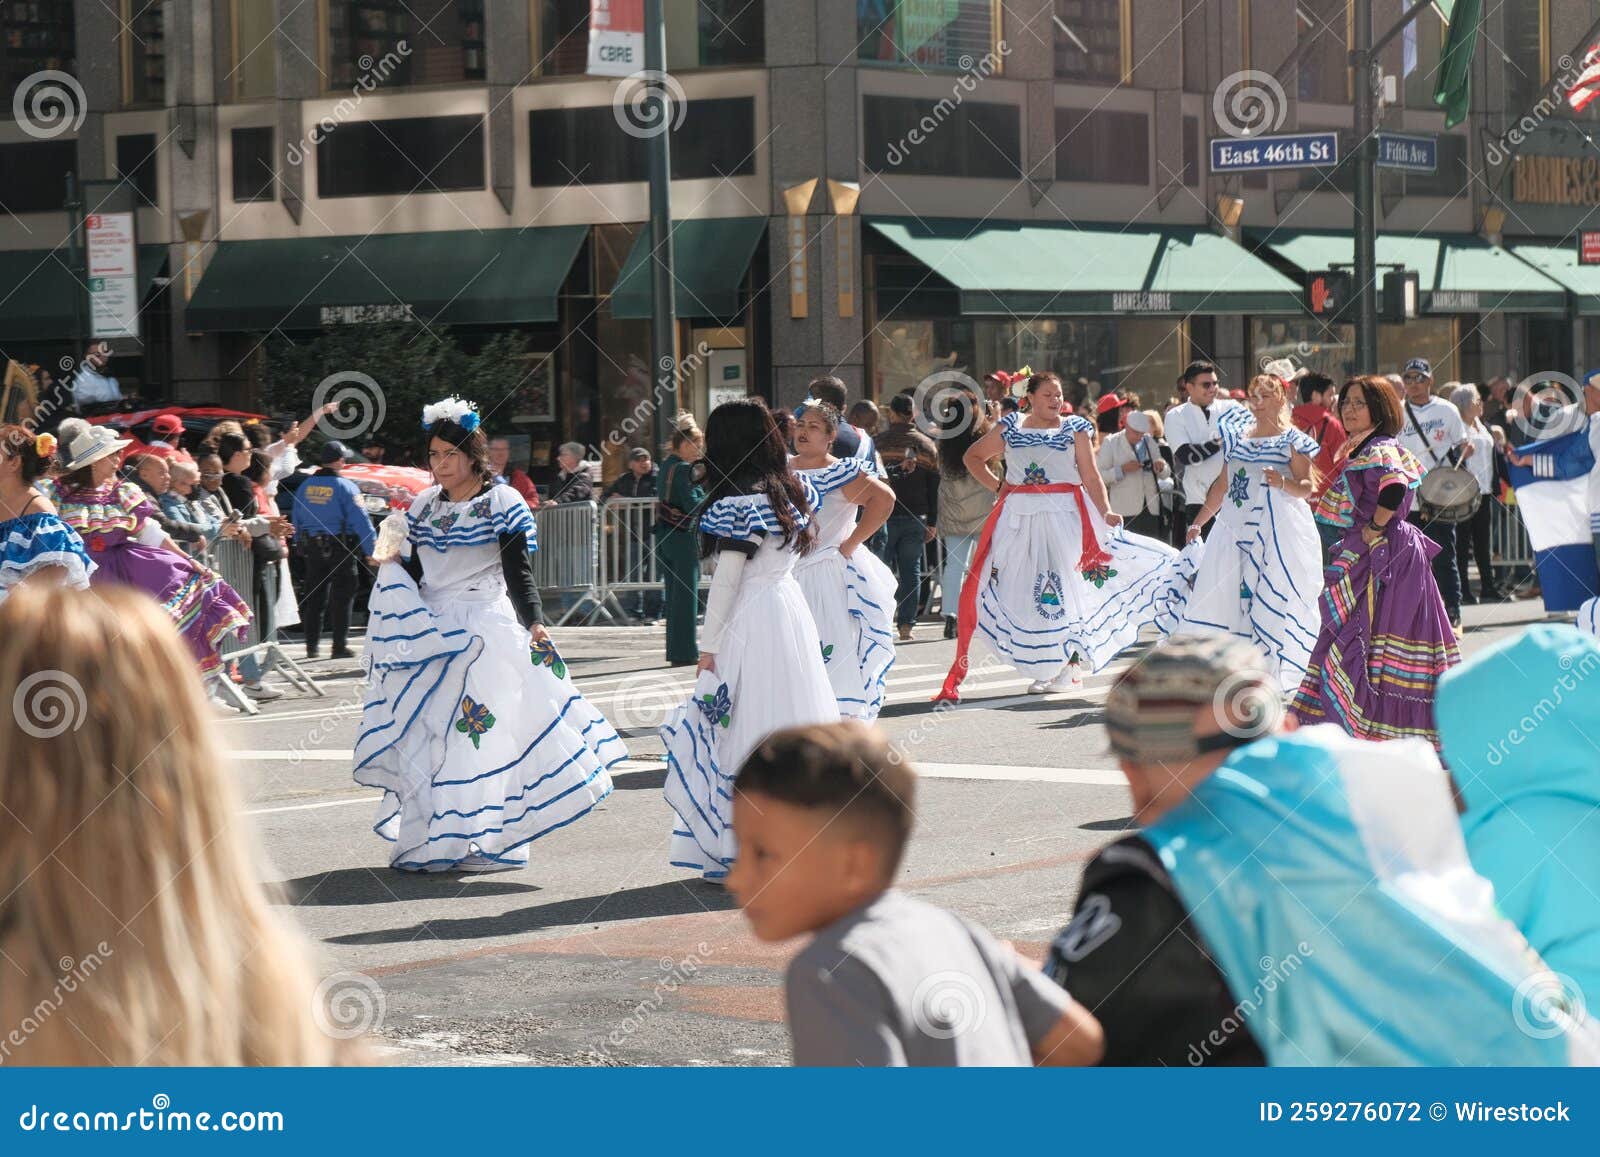 People in Traditional Clothes Dancing Hispanic Day Parade in New York